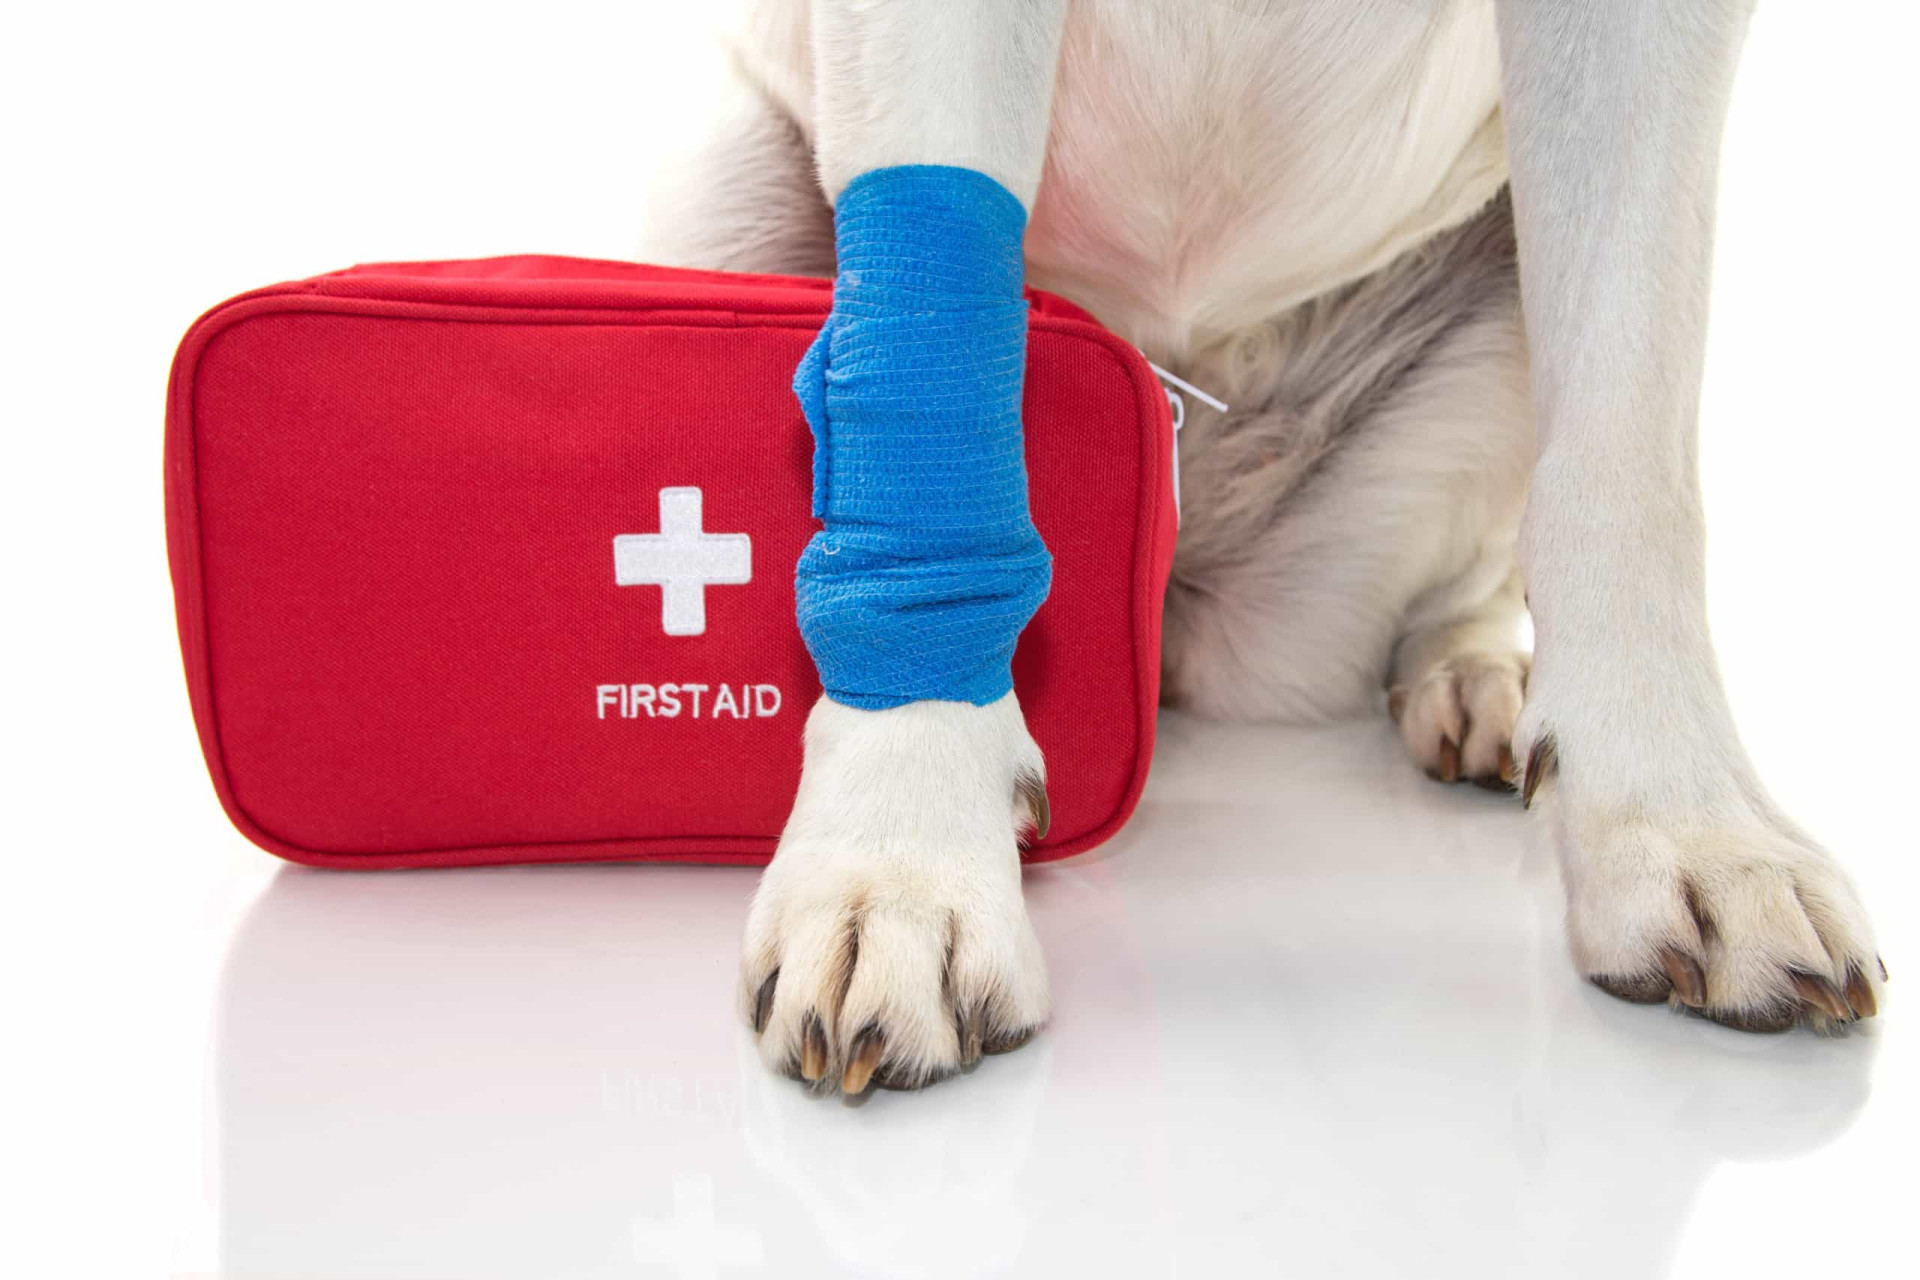 <p>Just like with humans, accidents happen, and dogs can get hurt. You might also want to buy or put together your own dog first aid kit.</p><p><a href="https://www.msn.com/en-us/community/channel/vid-7xx8mnucu55yw63we9va2gwr7uihbxwc68fxqp25x6tg4ftibpra?cvid=94631541bc0f4f89bfd59158d696ad7e">Follow us and access great exclusive content every day</a></p>